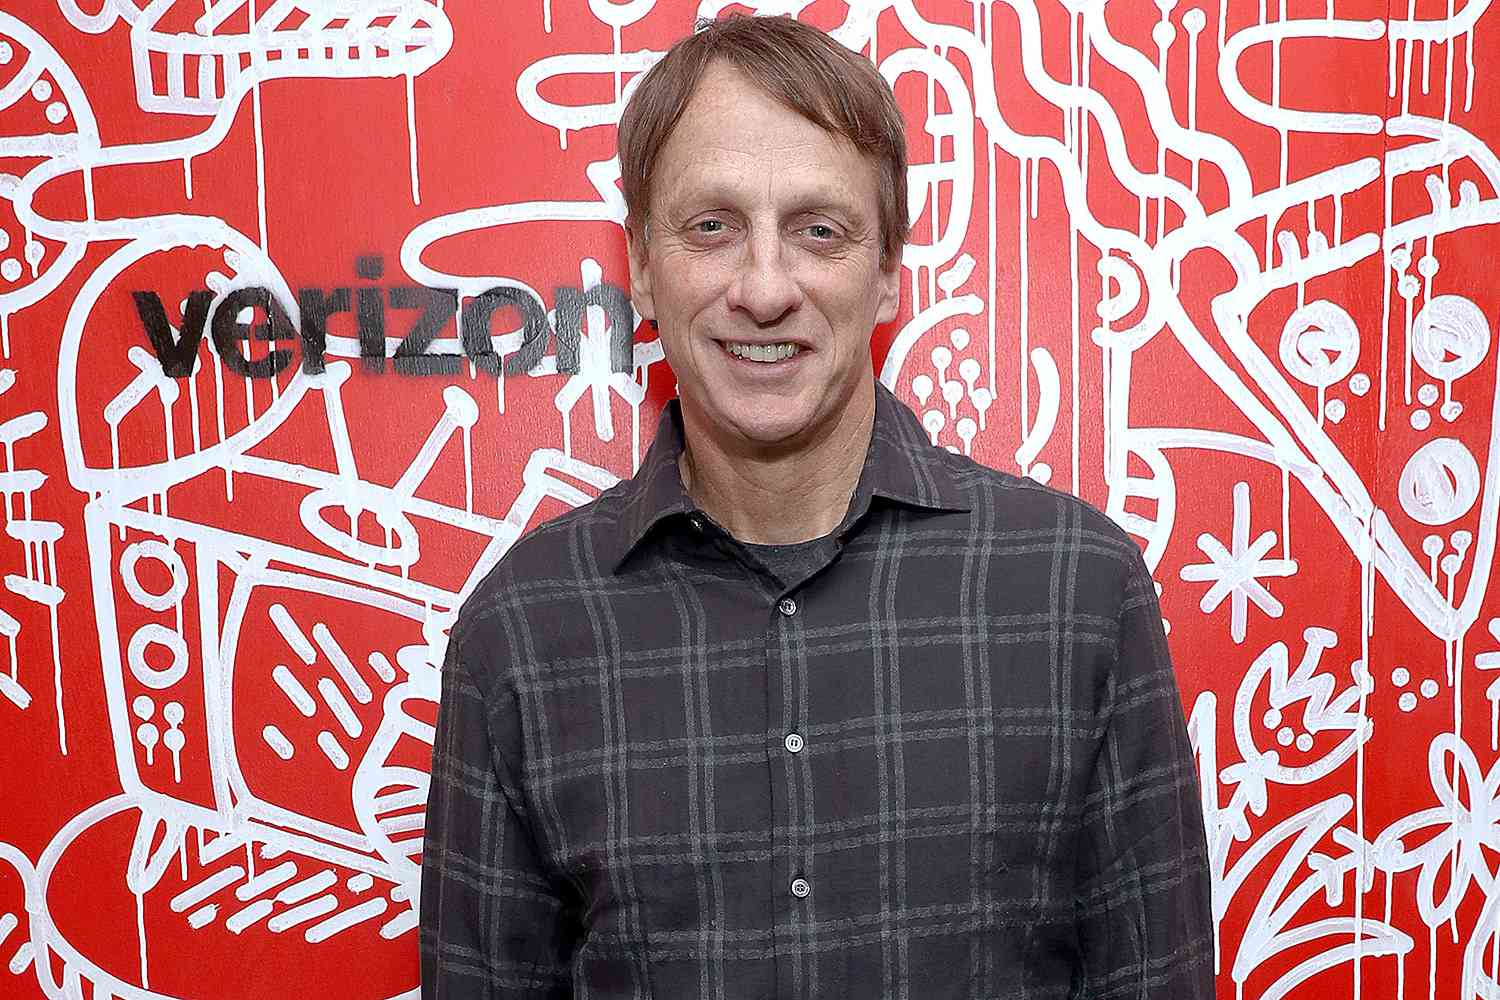 Tony Hawk on Unretiring for the 2028 Olympics: 'I Don't Think You Want to See Me Competing When I'm 60' (Exclusive)